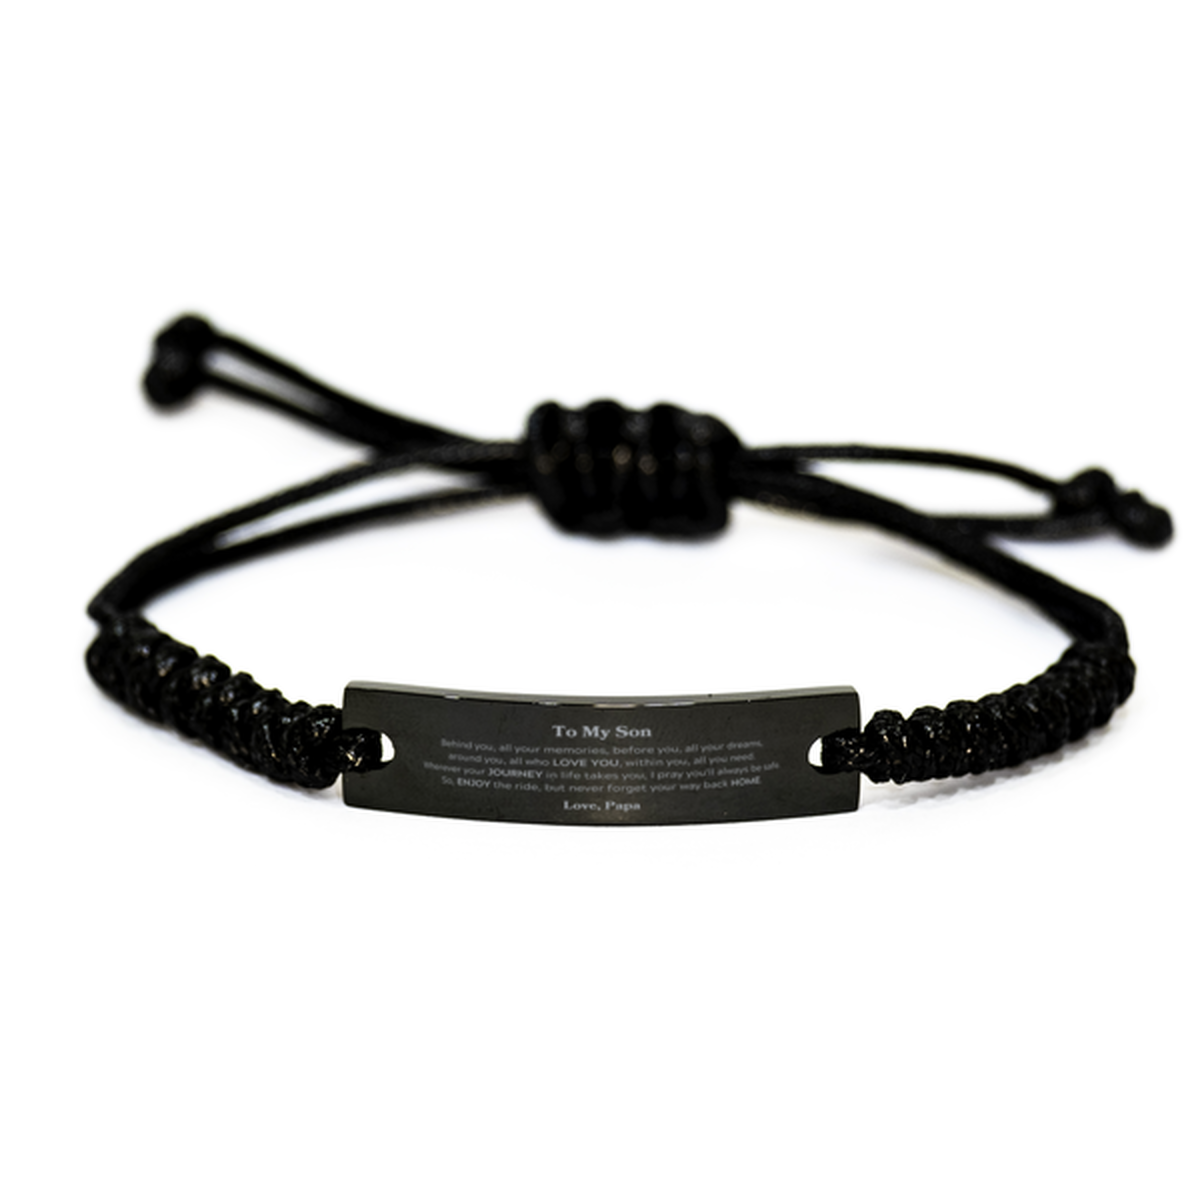 To My Son Graduation Gifts from Papa, Son Black Rope Bracelet Christmas Birthday Gifts for Son Behind you, all your memories, before you, all your dreams. Love, Papa